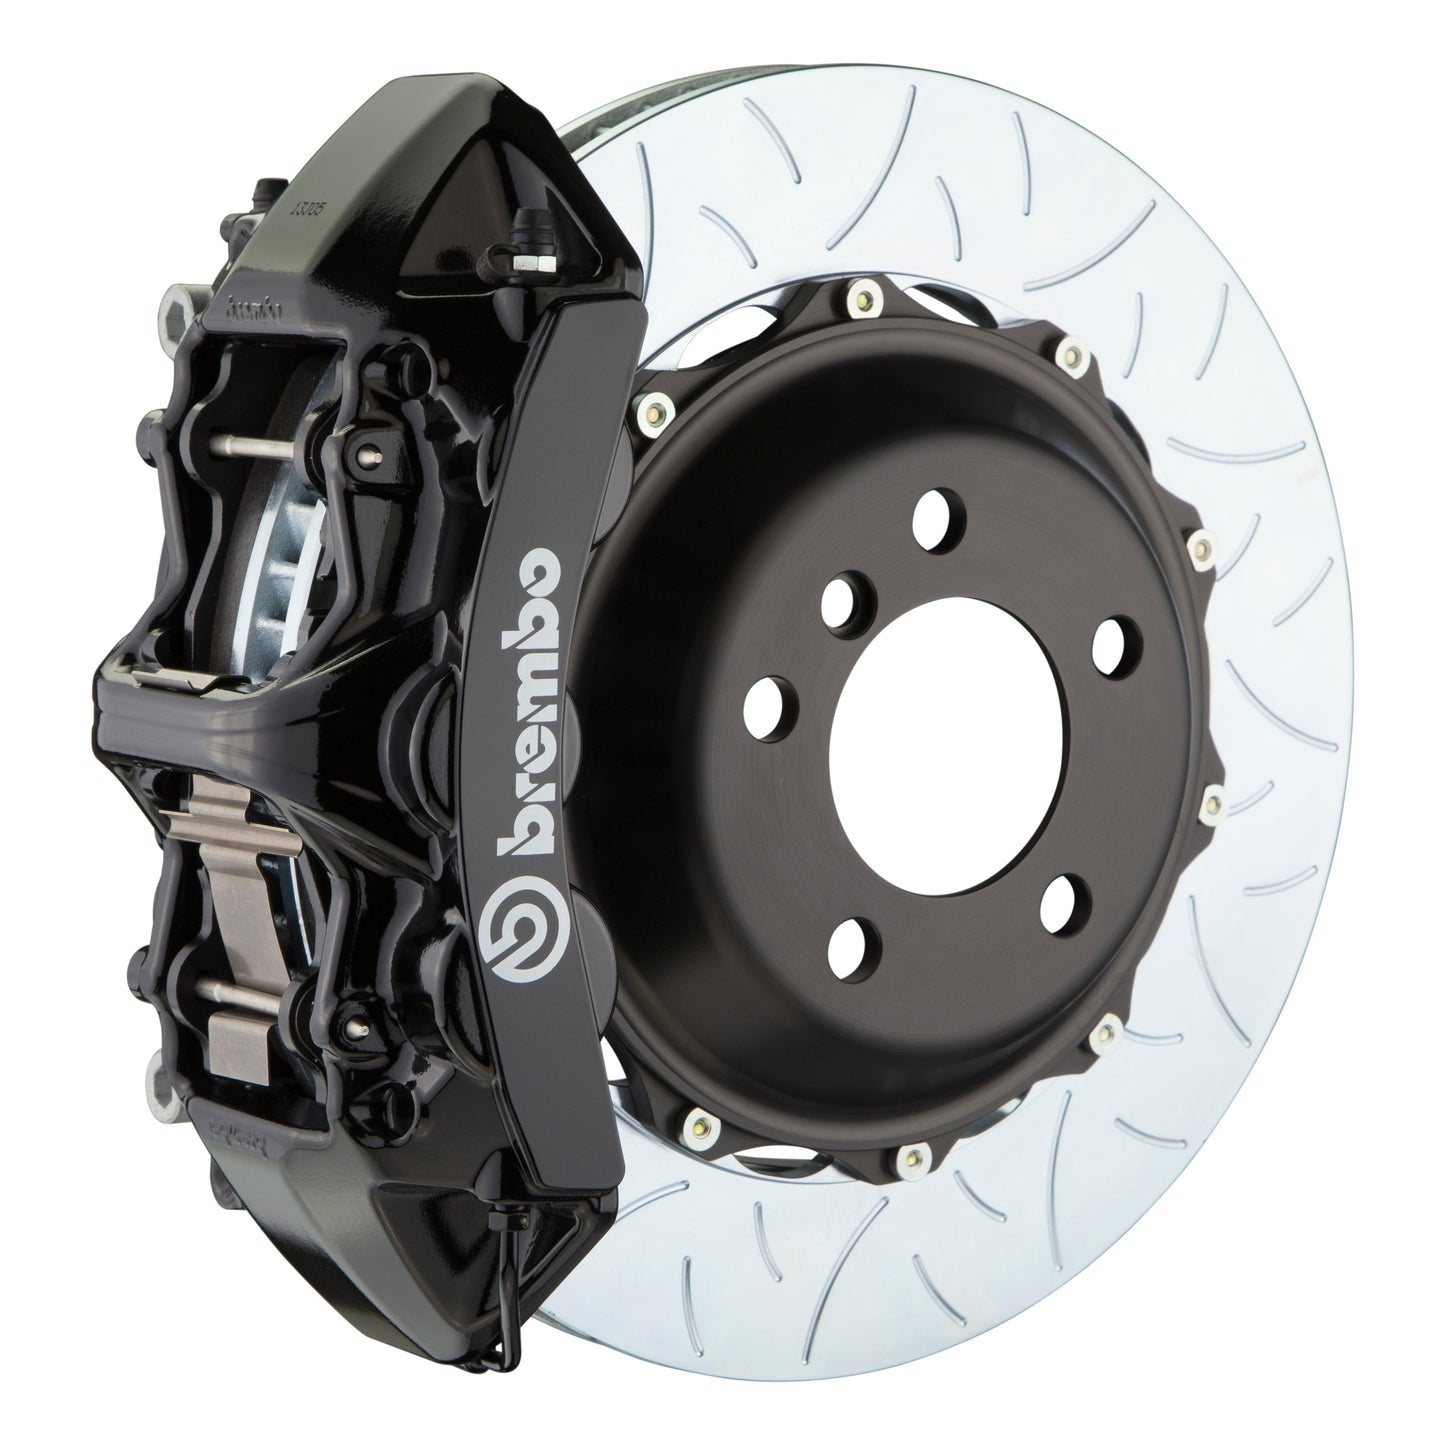 Front Brembo Gran Turismo Braking Upgrade Kit (1M19008A) GT / M6 Caliper with 6-Pistons & 2-piece 380x32 Disc